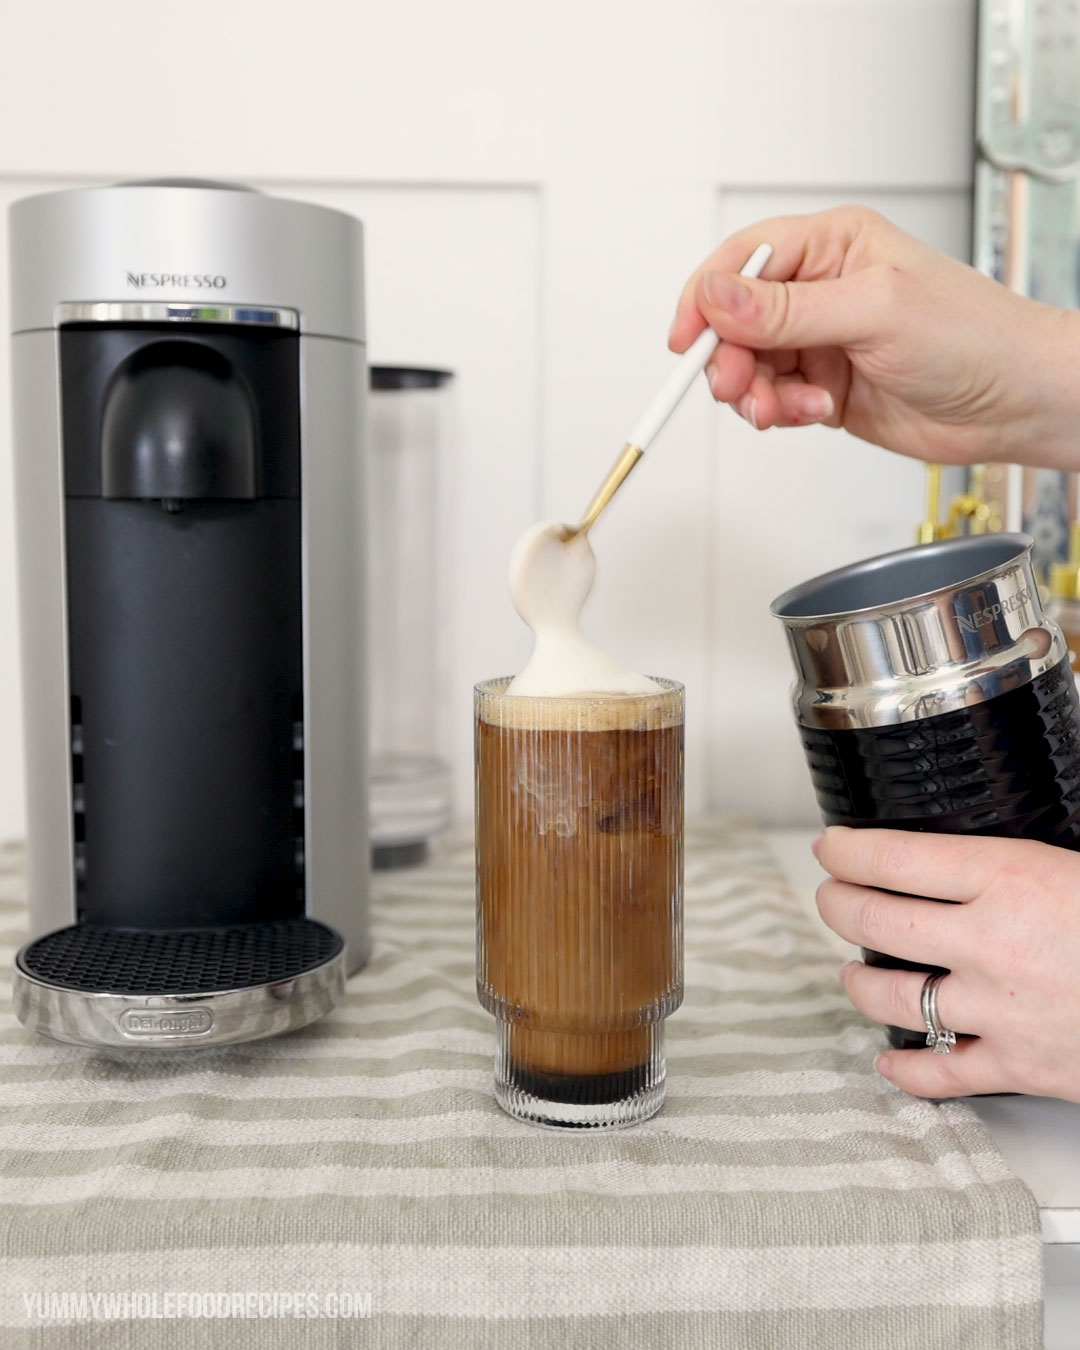 How to Make Easy Iced Coffee with Nespresso Vertuo